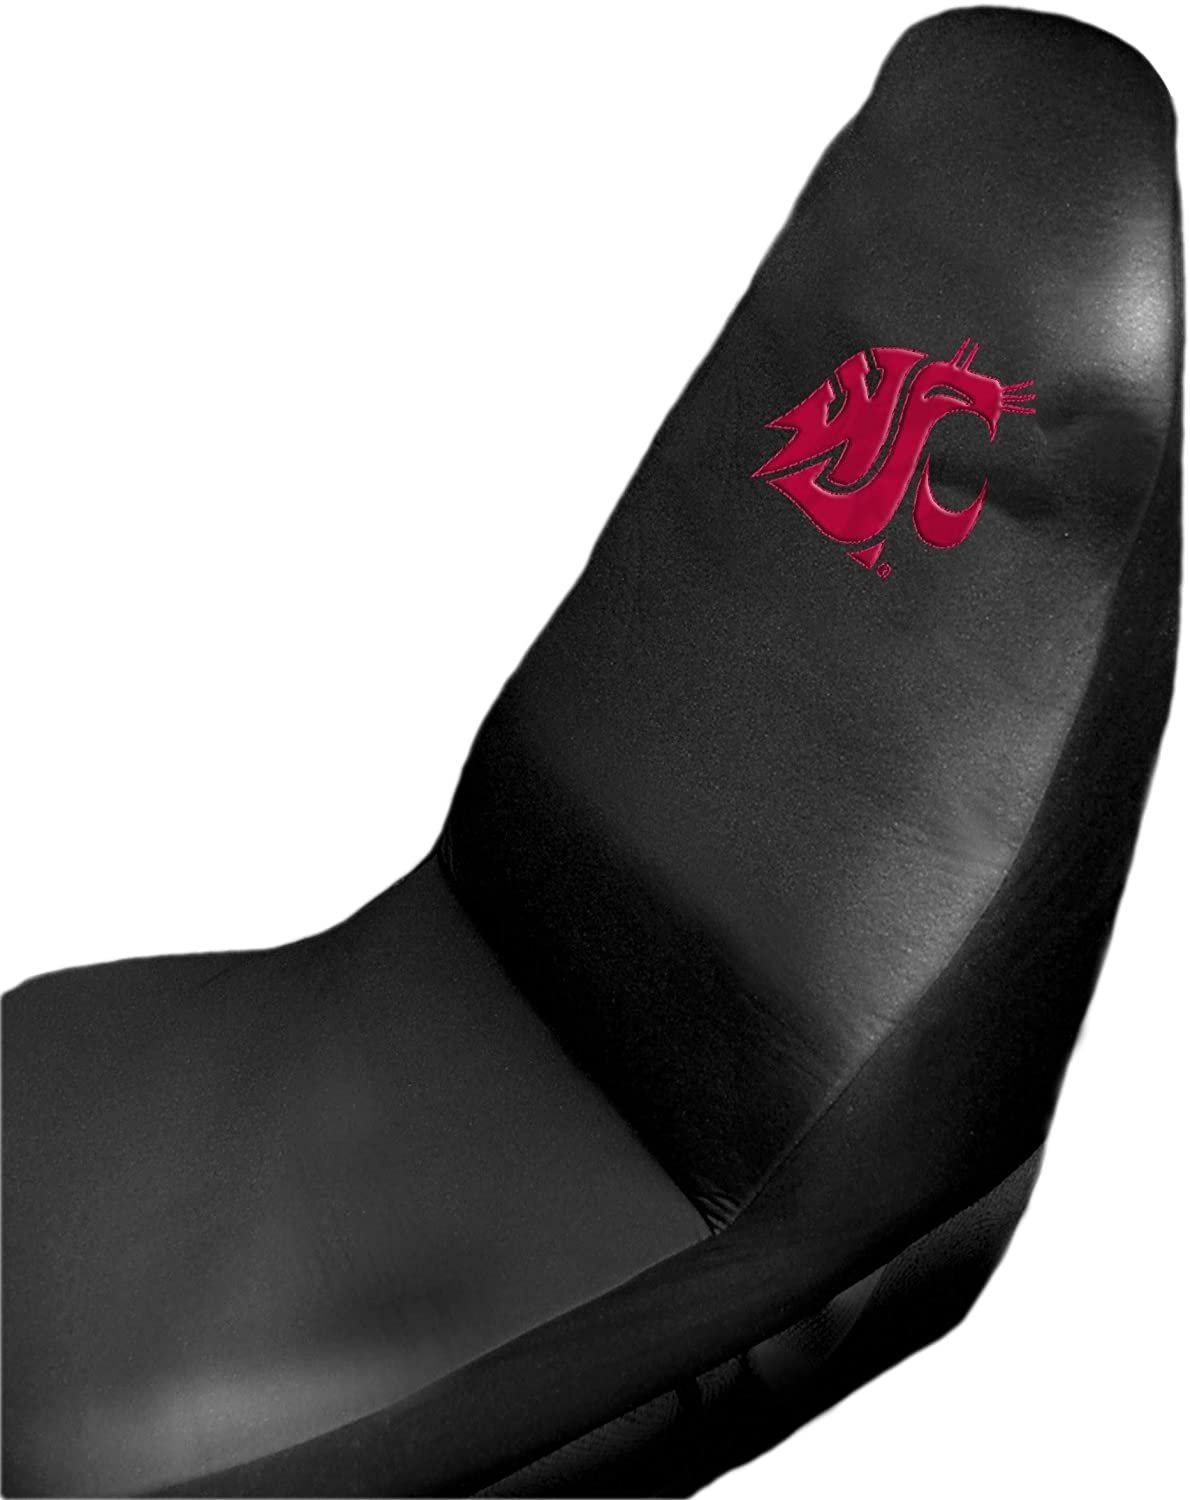 Washington State Cougars Bucket Auto Seat Cover 51x21 Inch Elastic